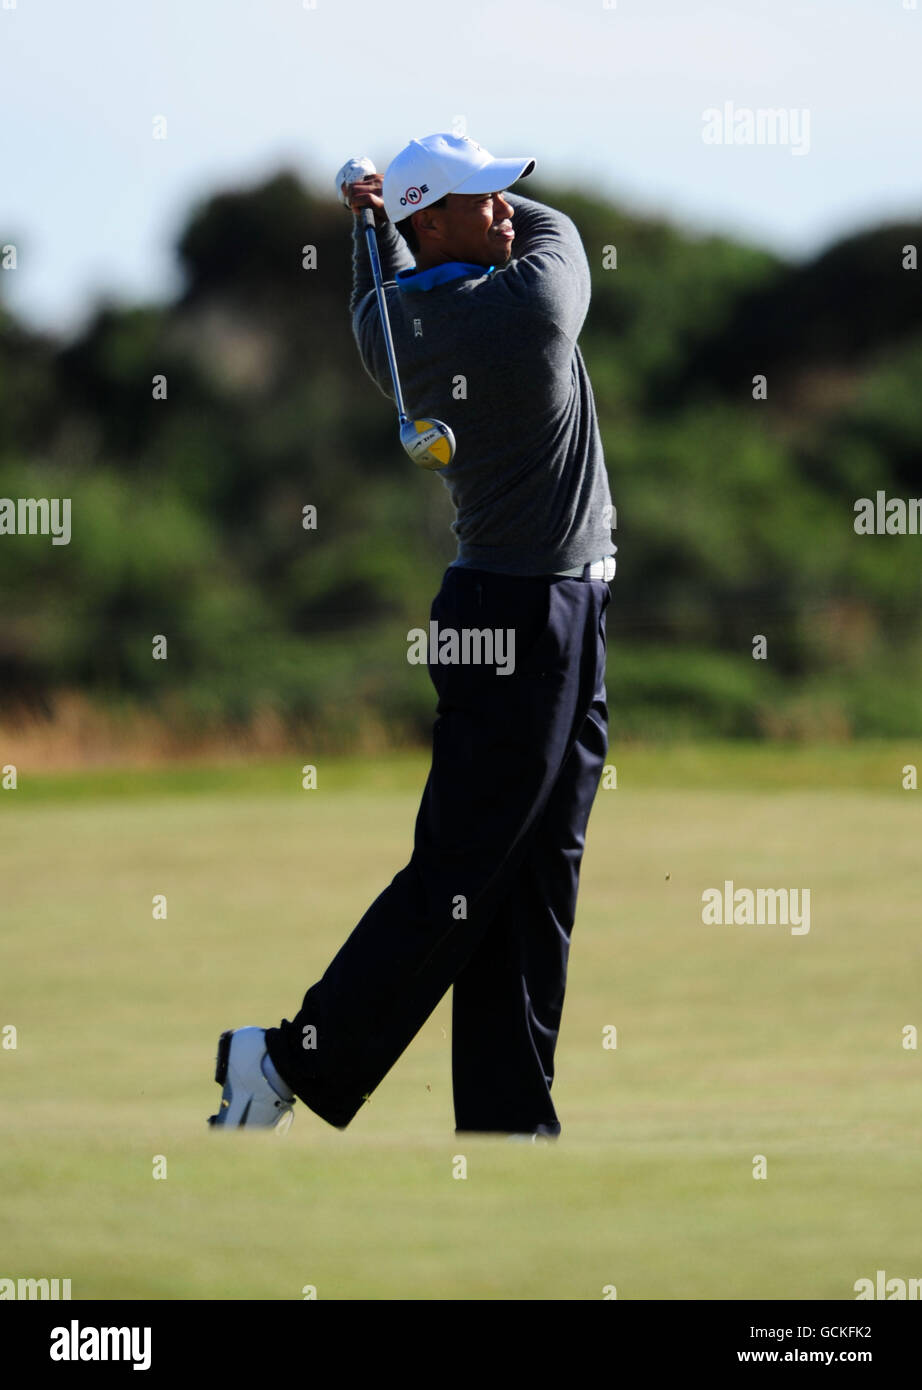 Golf - The Open Championship 2010 - Preview - Day Two - St Andrews Old Course. Tiger Woods out practising at St Andrews Stock Photo